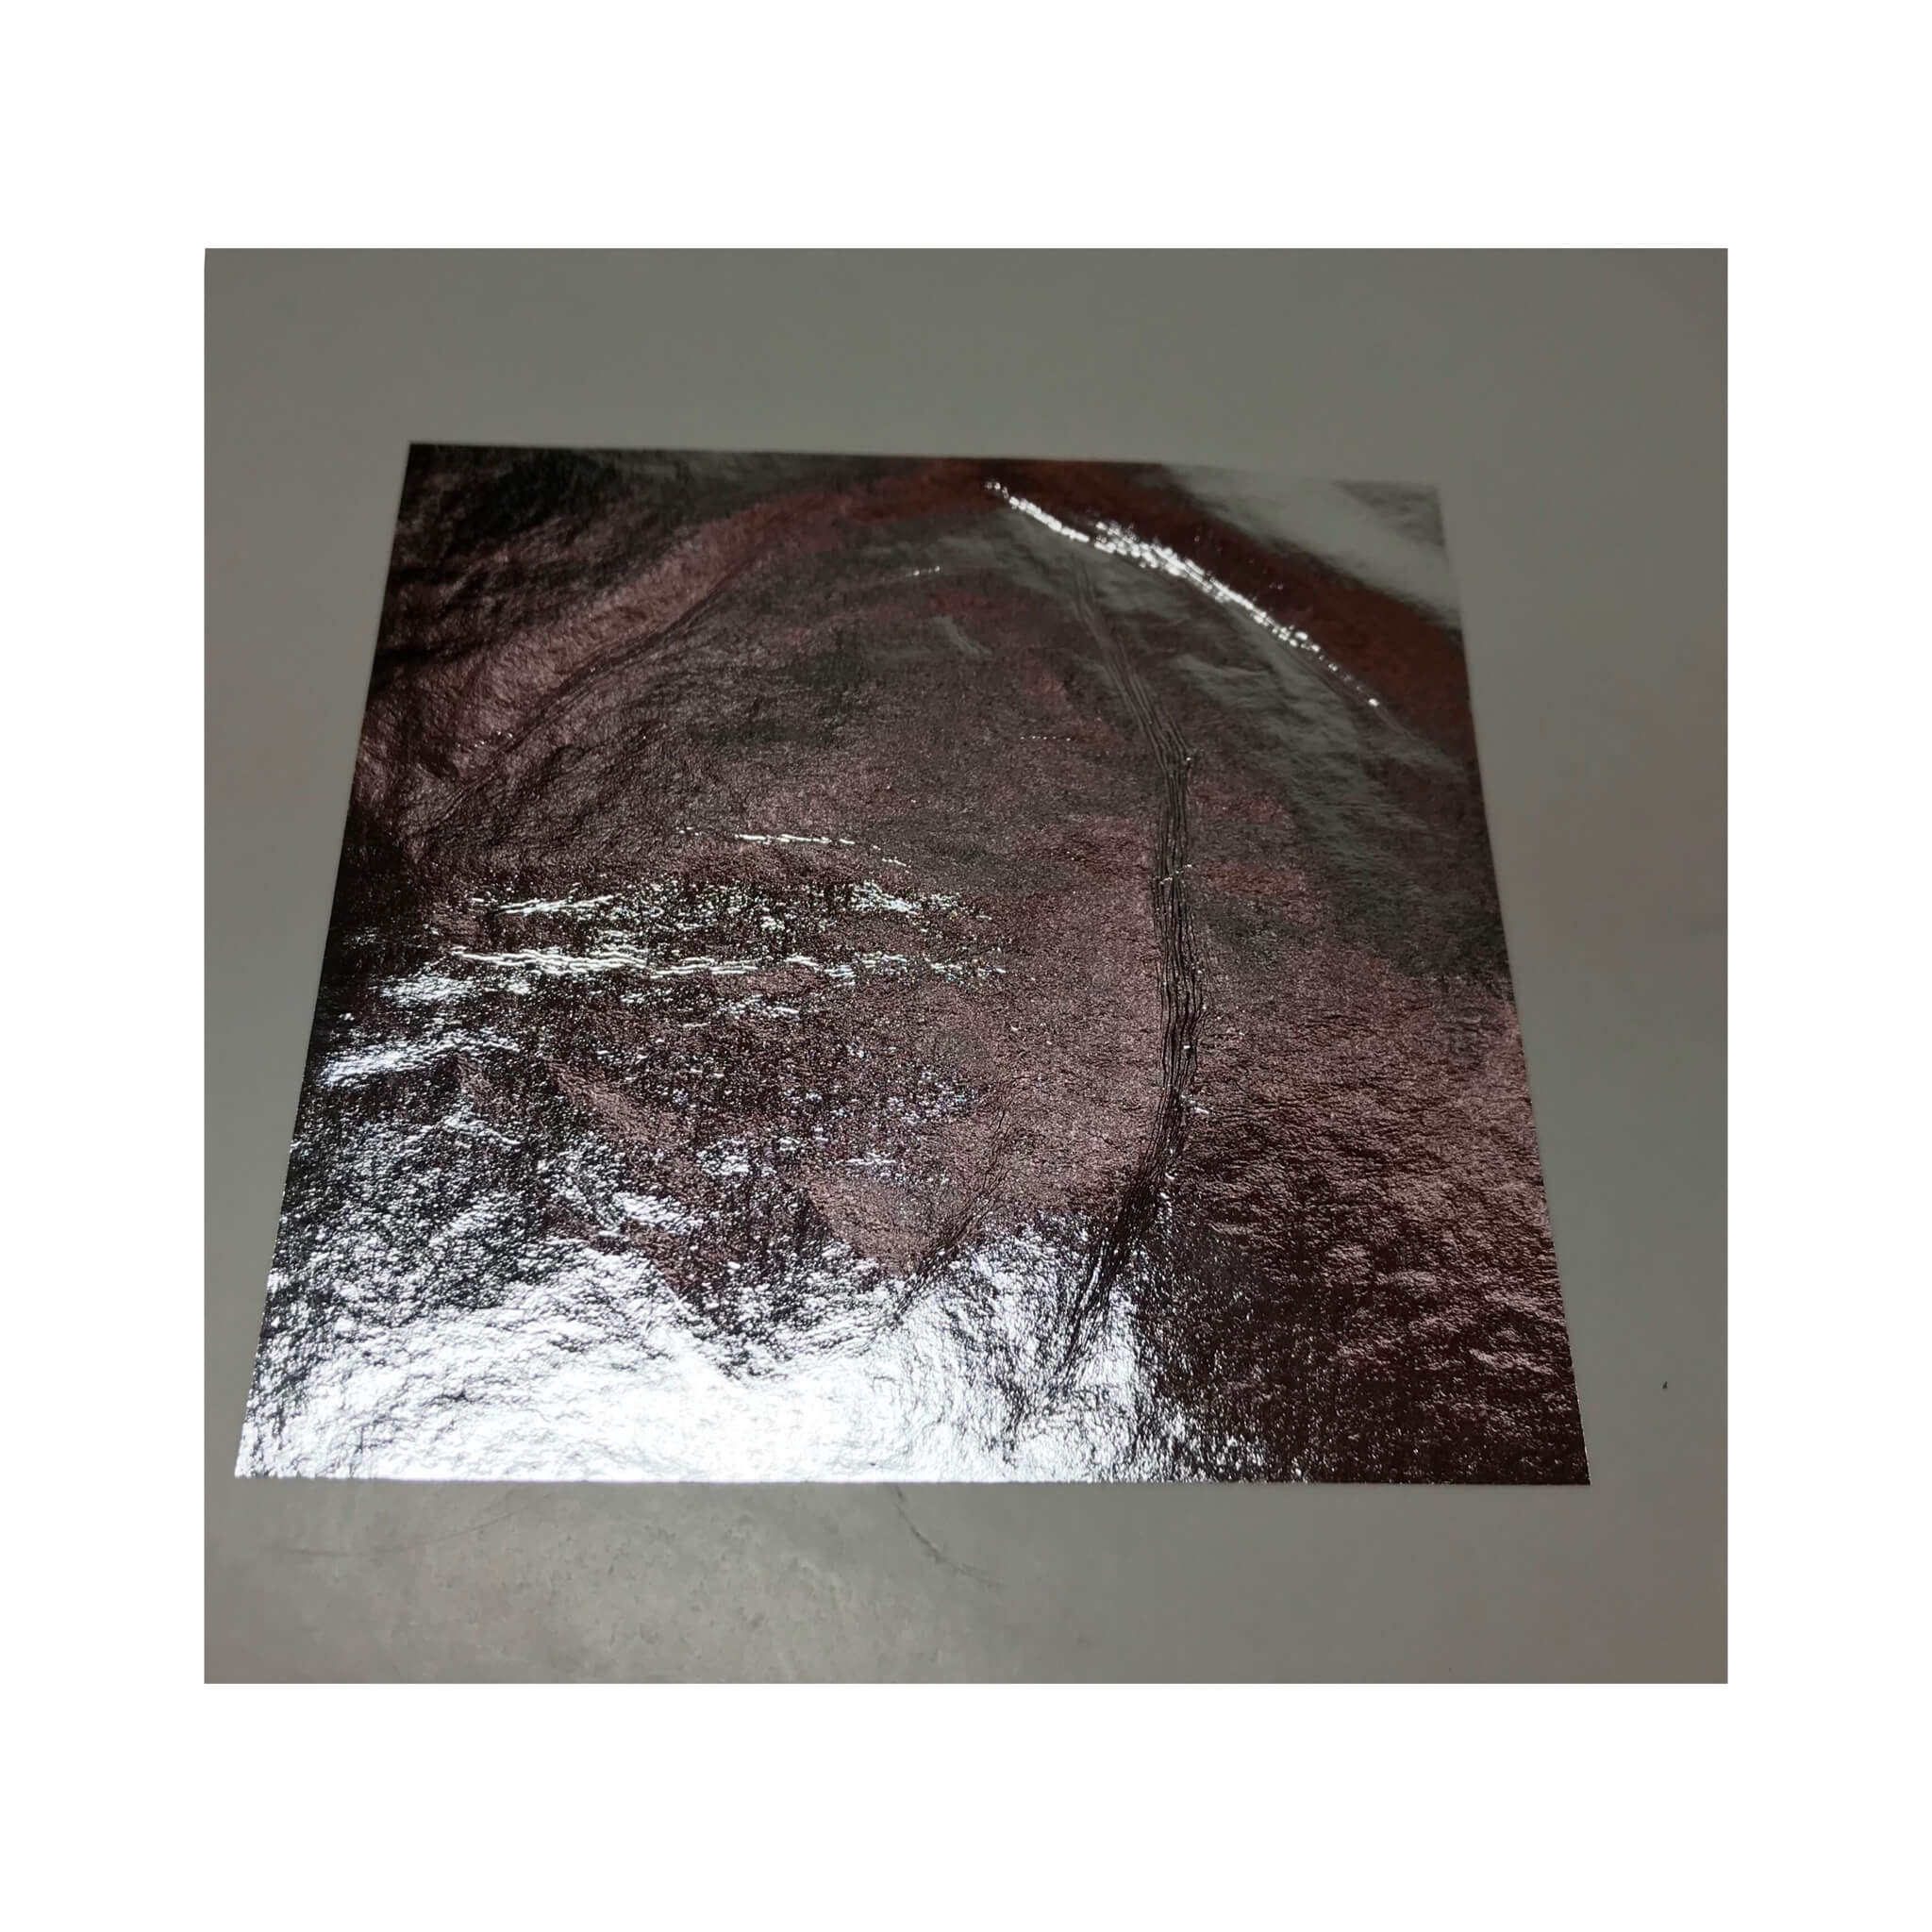 Pure Silver Metal Sheet/Foil, High Purity, Low Price $35